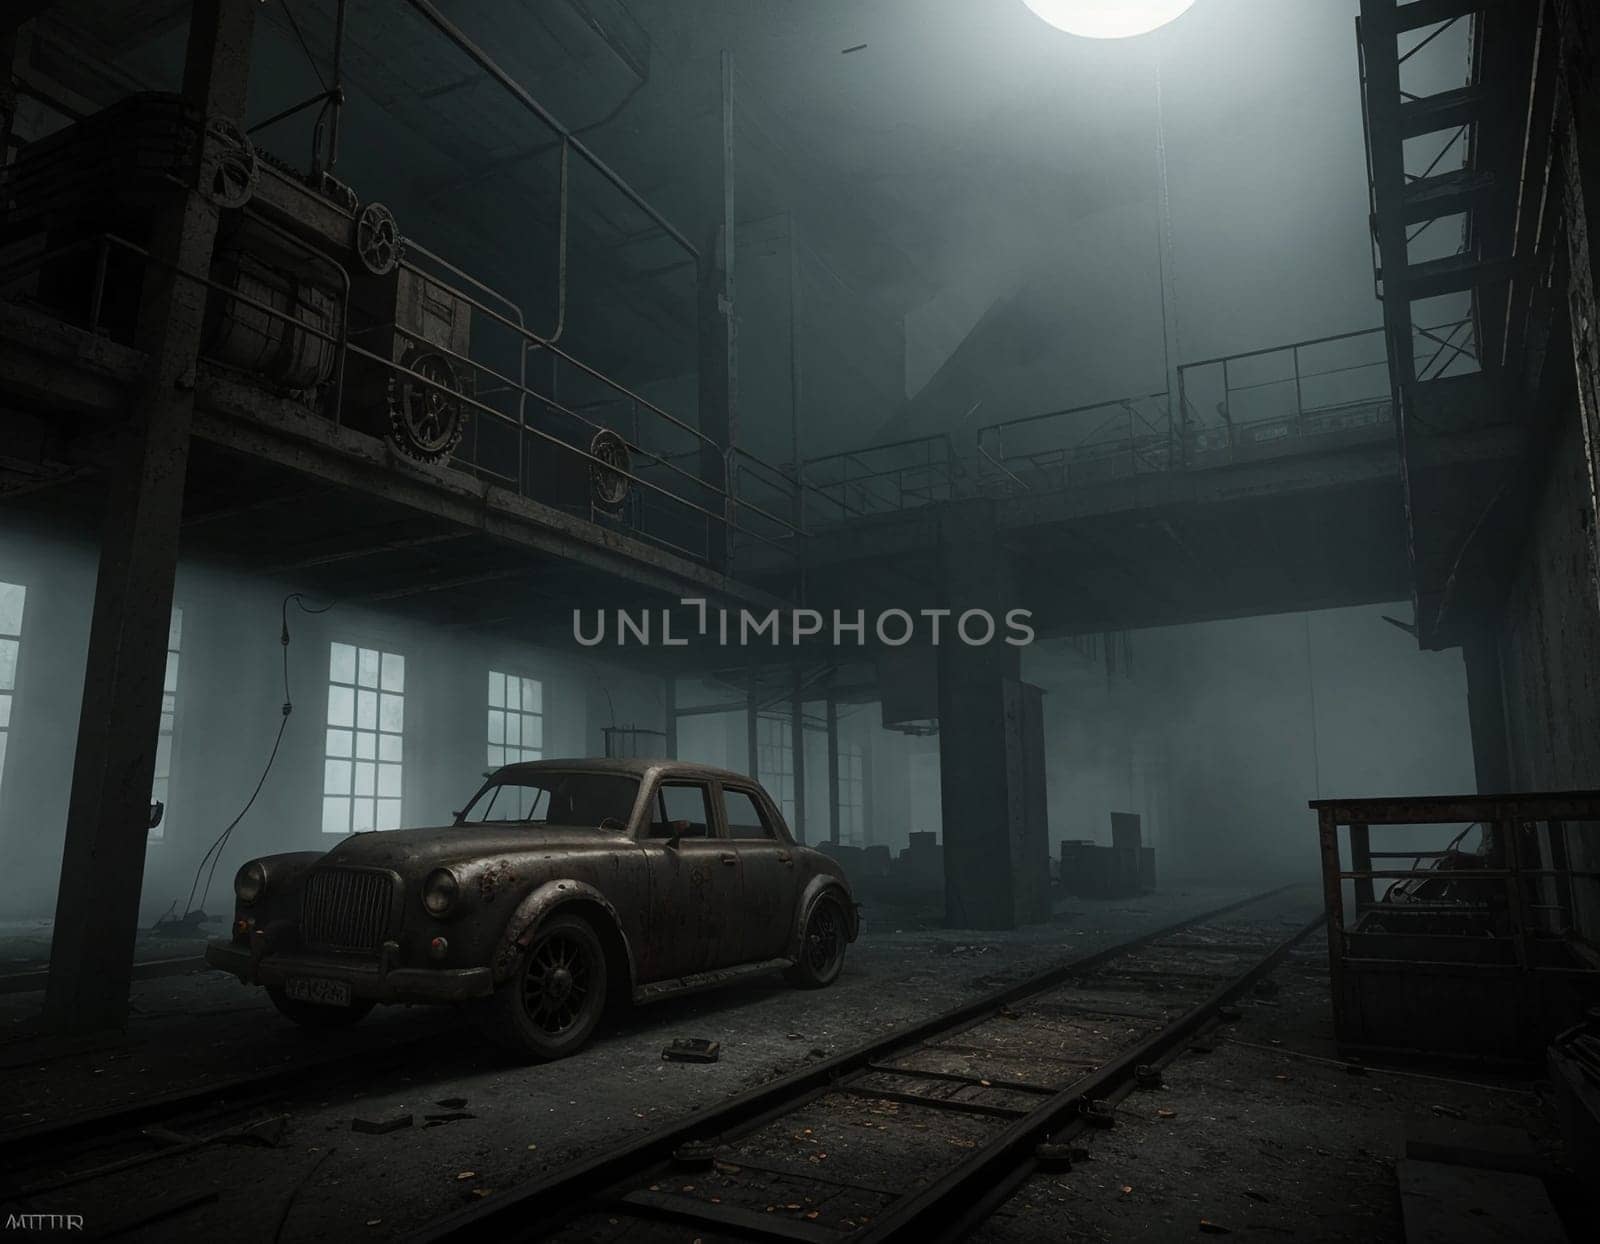 A car on the ruins of an abandoned futuristic city.Gloomy abandoned buildings. Deep and rich colors